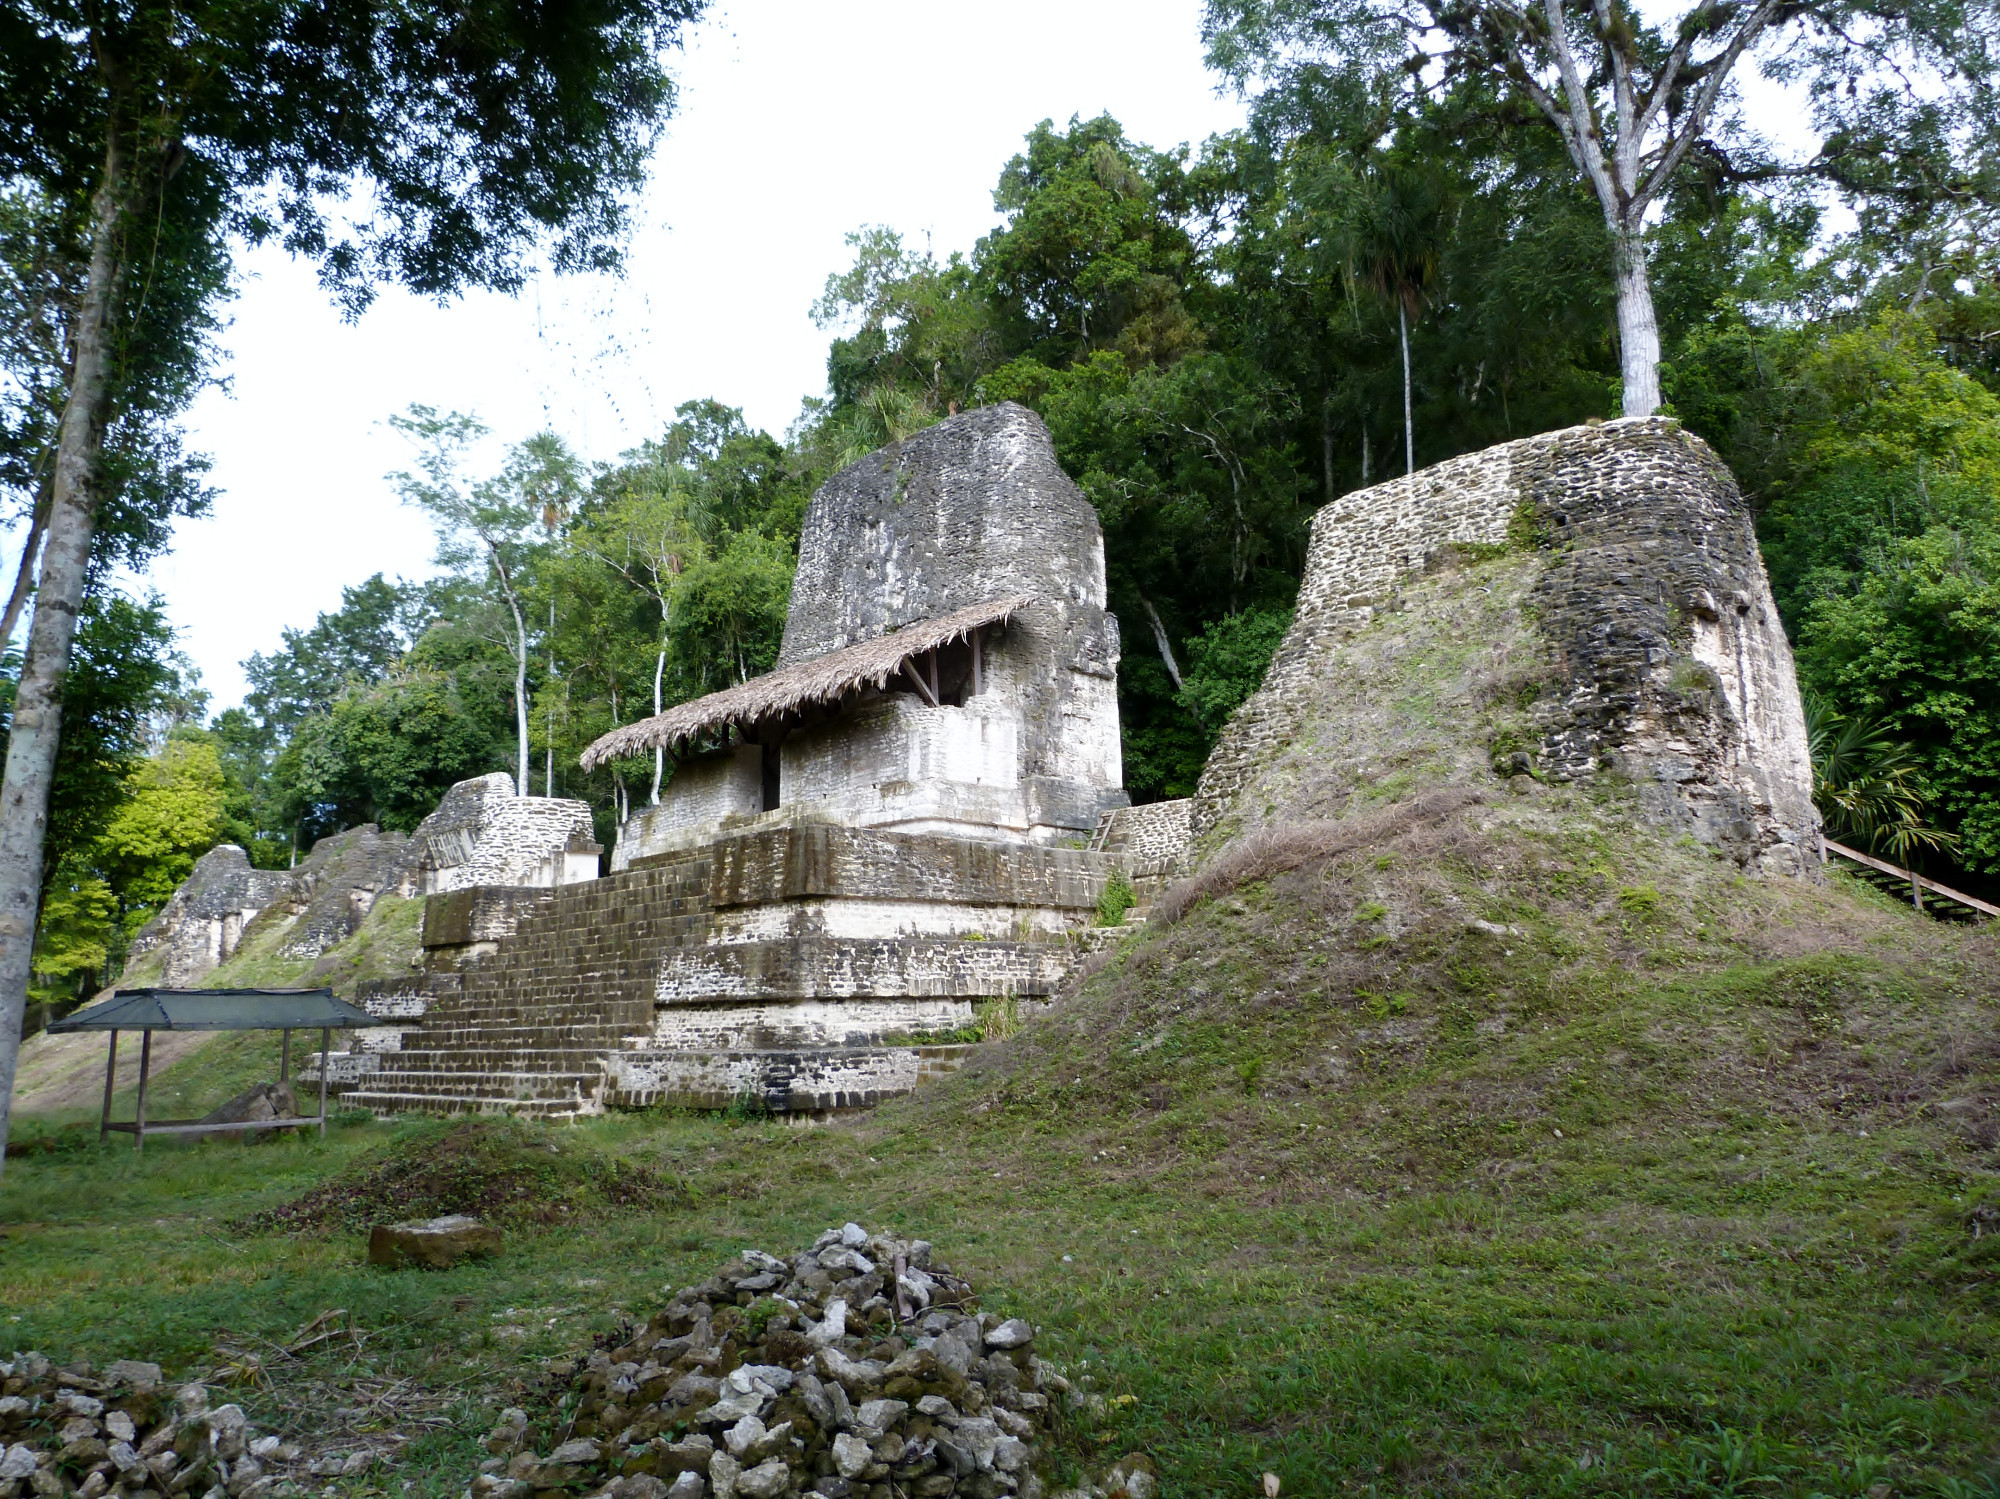 Temple in the Plaza of the Seven Temples